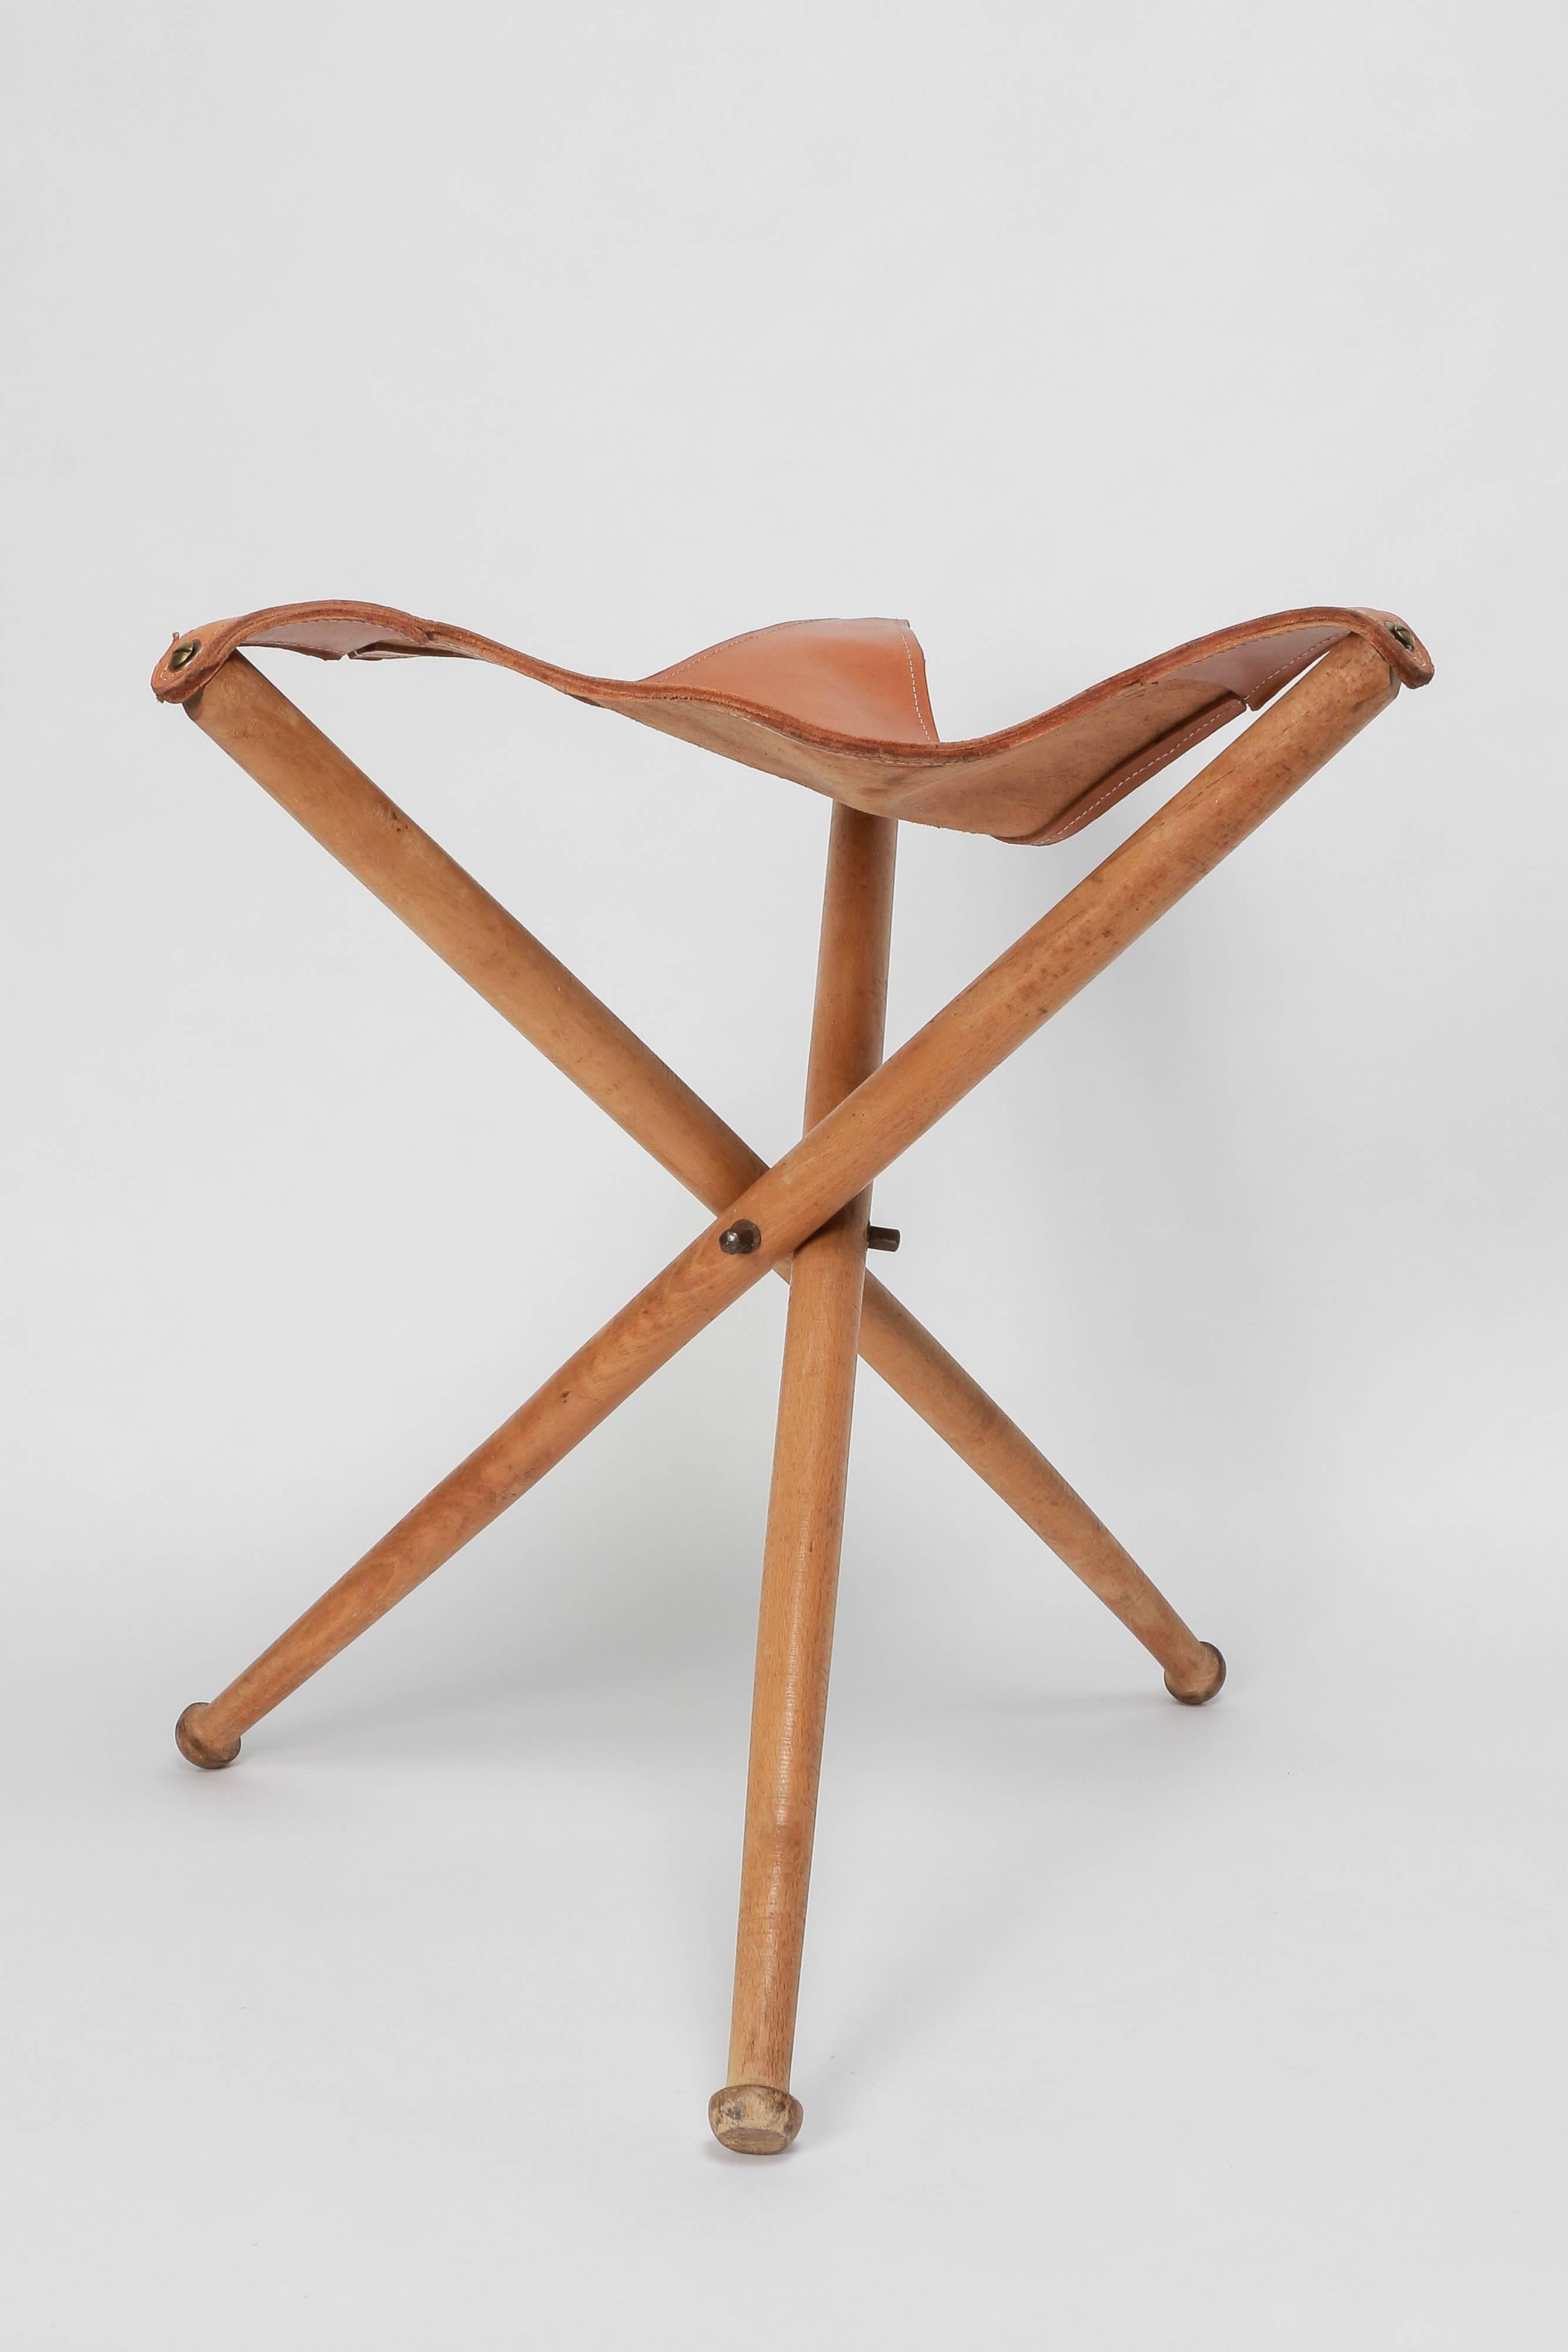 Tripod hunting stool with legs made of solid beech wood and a seat of thick saddle leather, manufactured in the 1940s. 65 cm long when folded.